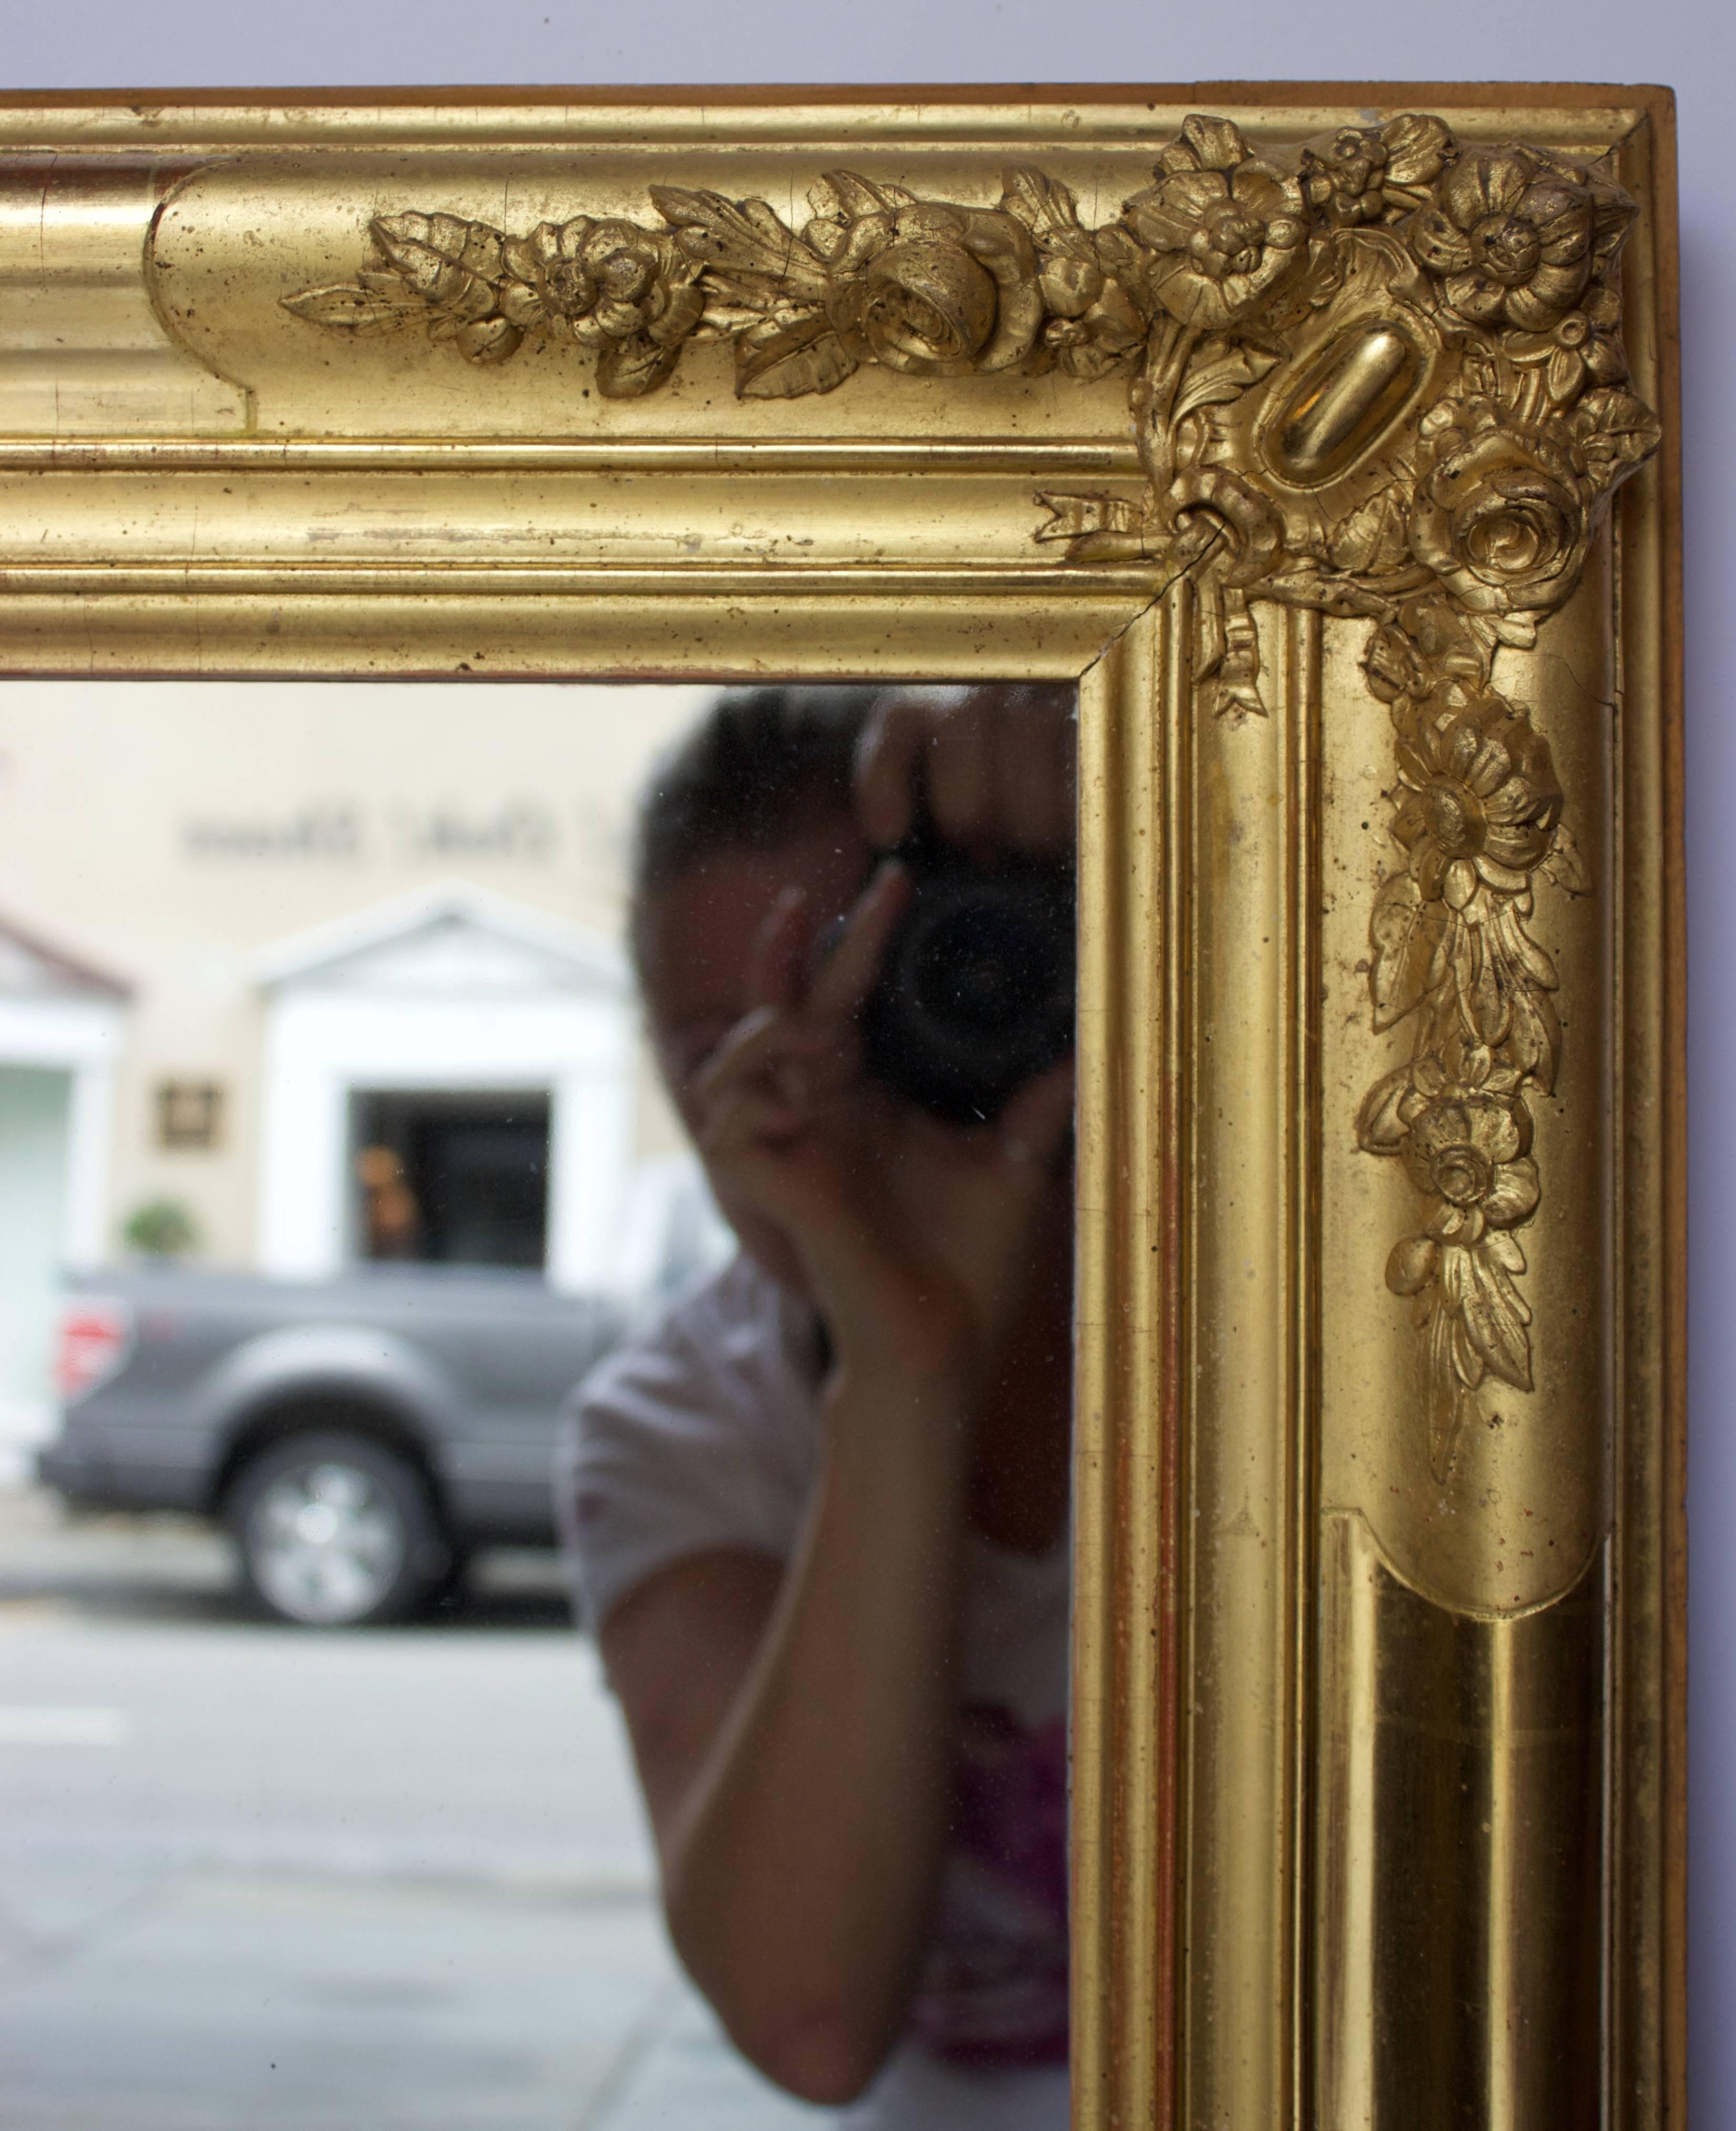 This gorgeous mirror reflects perfectly what a French Restauration (1815-1830) period mirror should be: Wooden frame with water gold gilt decor alnernatively high and low sheen and ornated by gesso molded and gilded flowers on all four